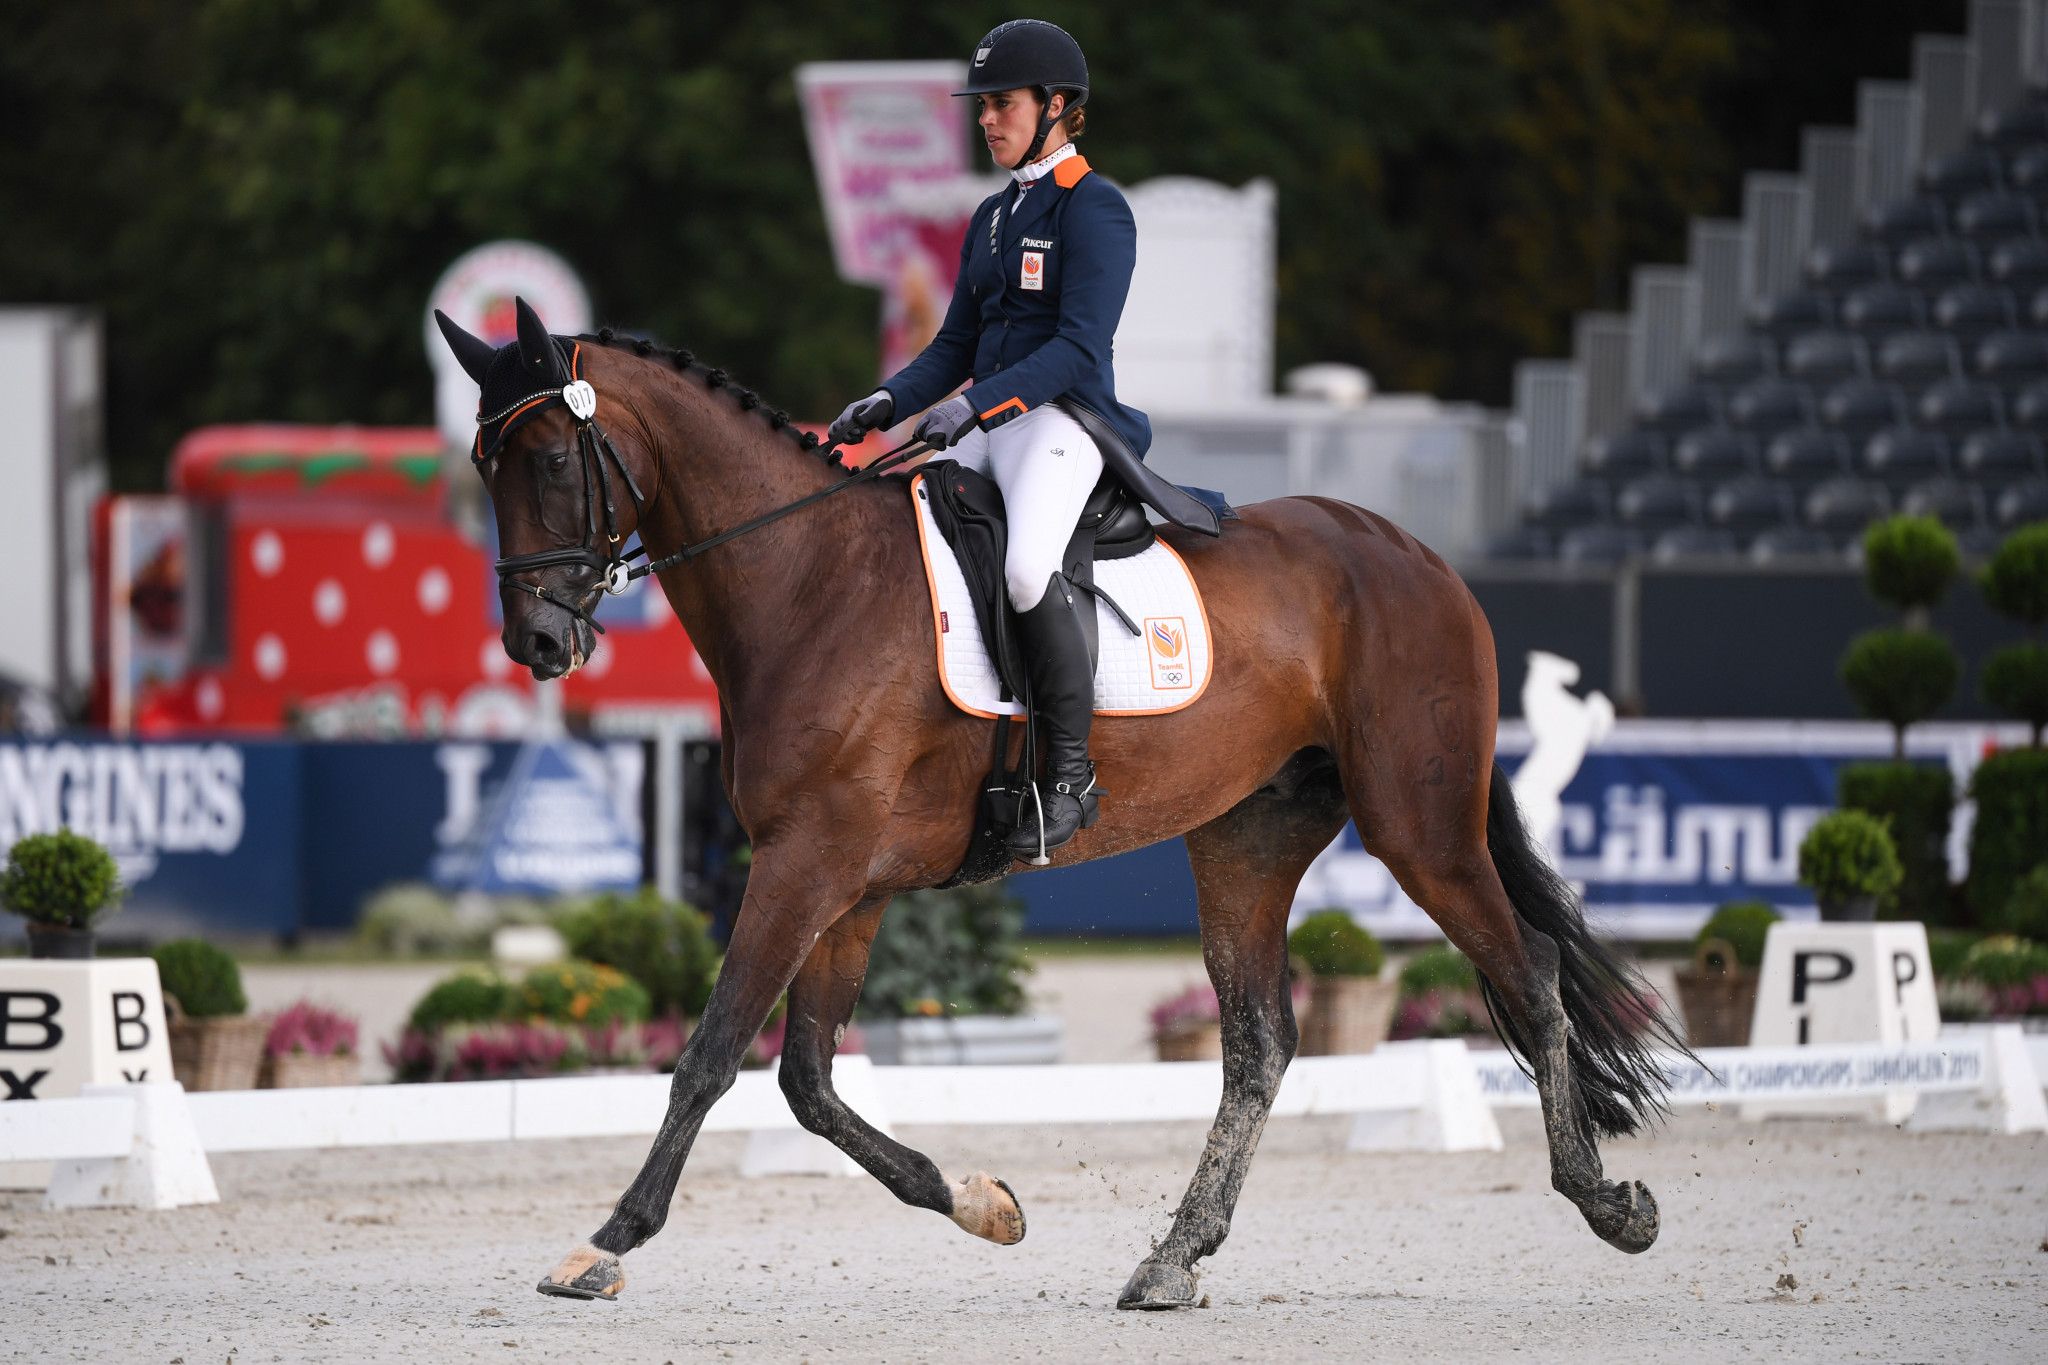  Blom and Redele joint leaders in dressage at FEI Nations Cup Eventing 